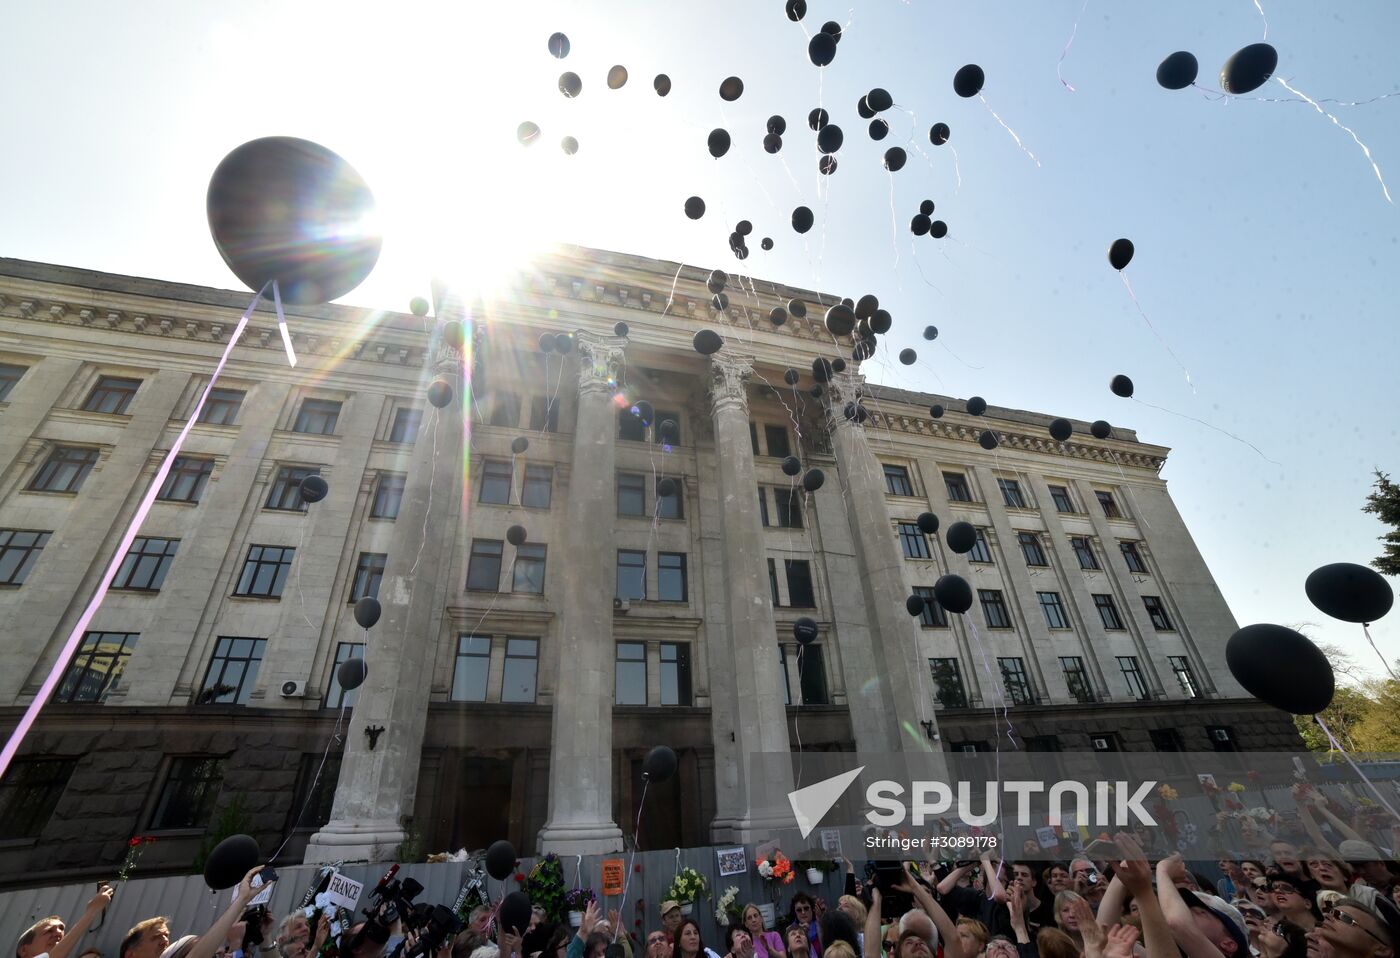 Memorial events for those killed on May 2, 2014 in Odessa